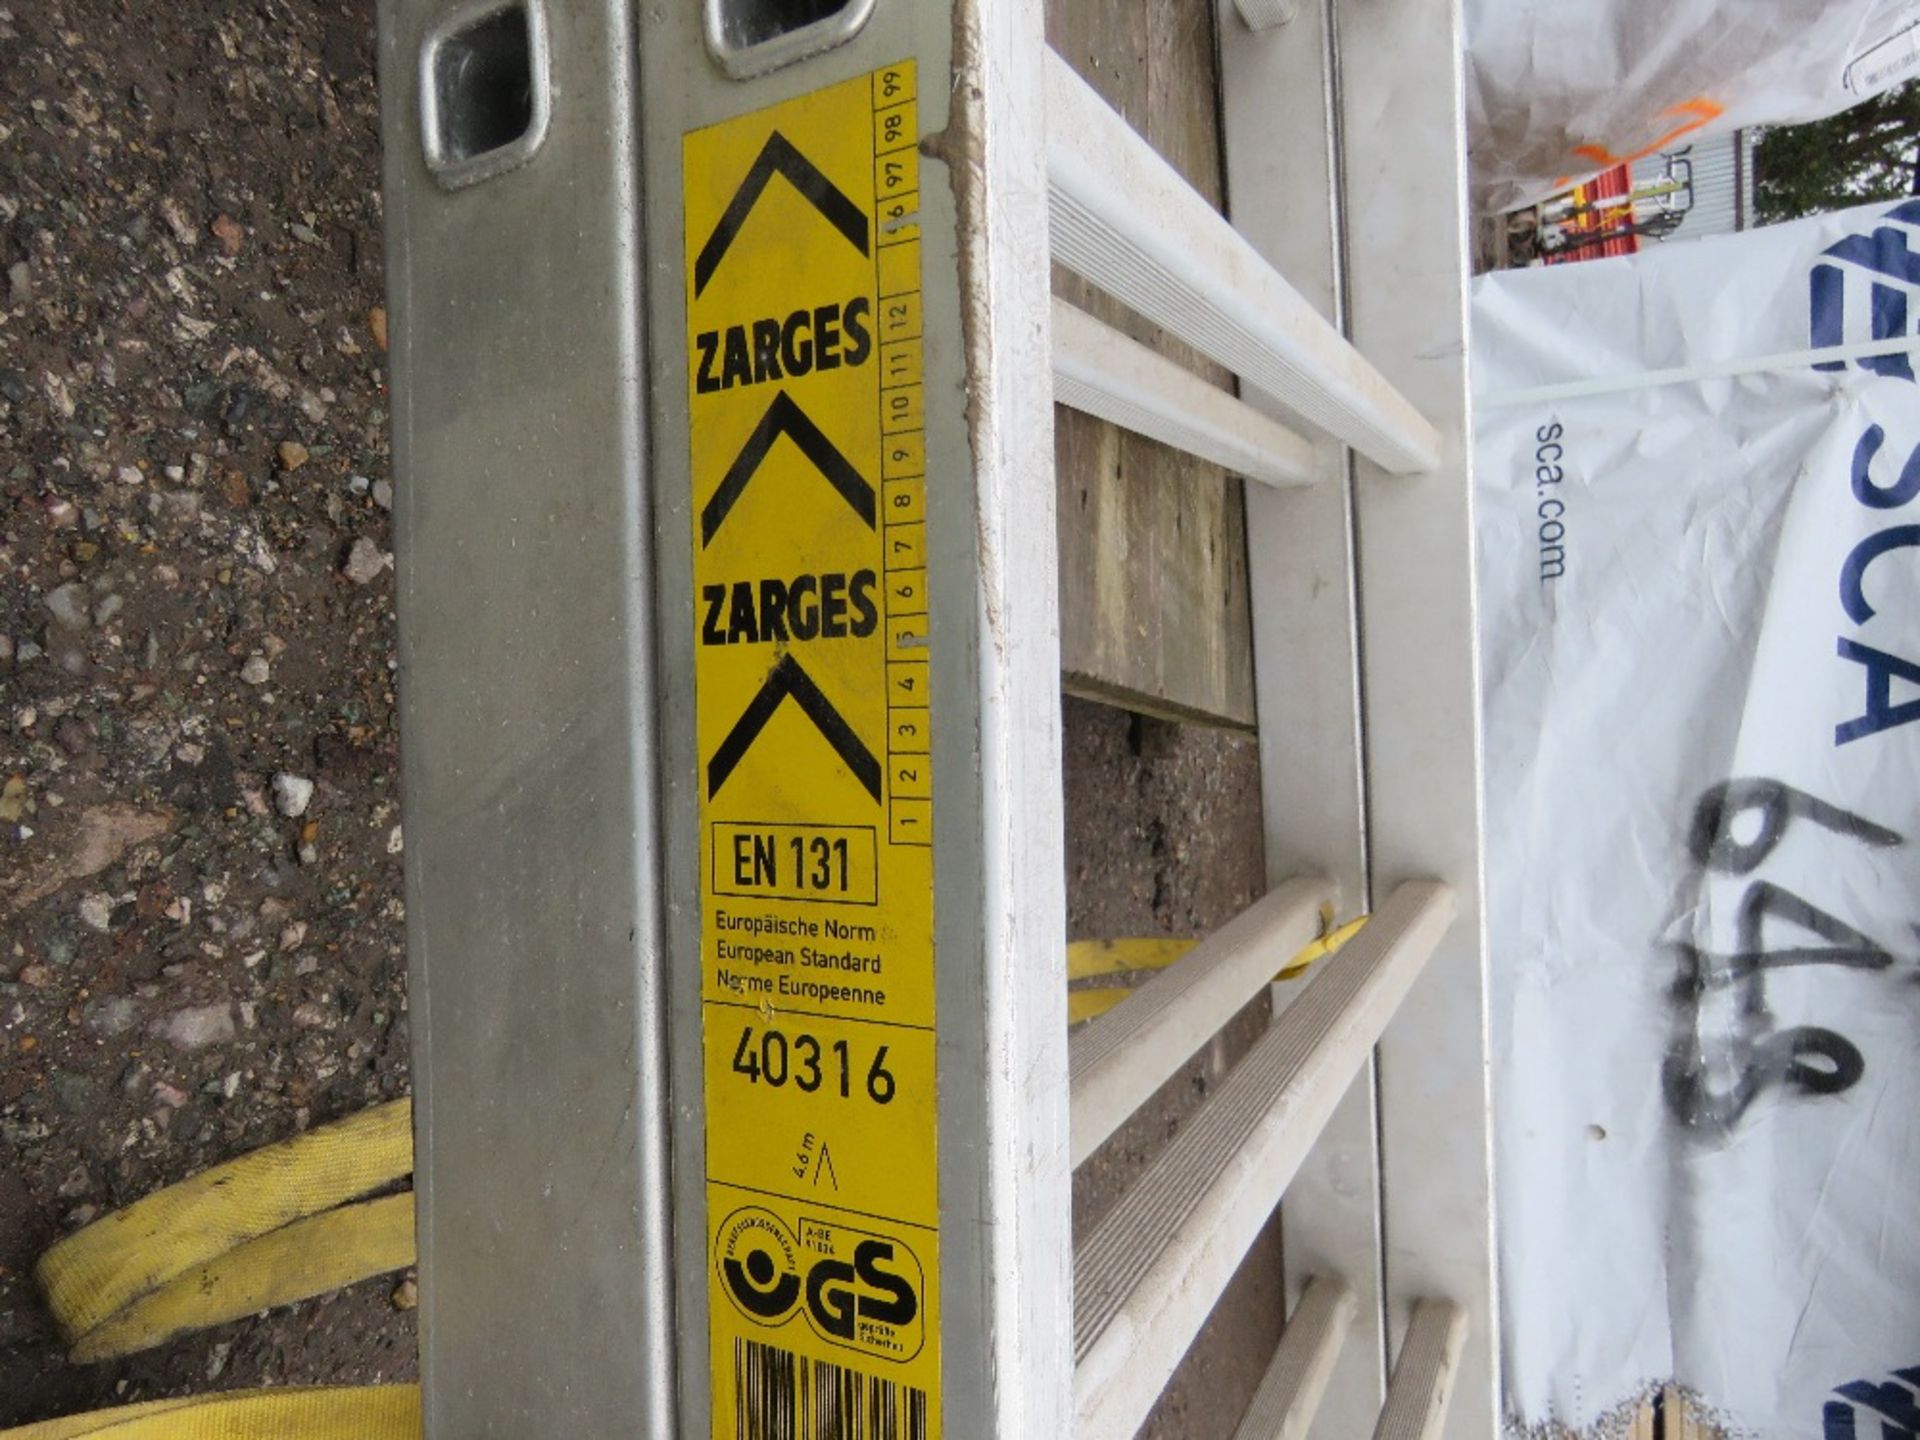 PAIR OF LARGE ALUMINIUM STEP LADDERS, 15FT OVERALL LENGTH APPROX. SOURCED FROM COMPANY LIQUIDATION. - Image 2 of 3